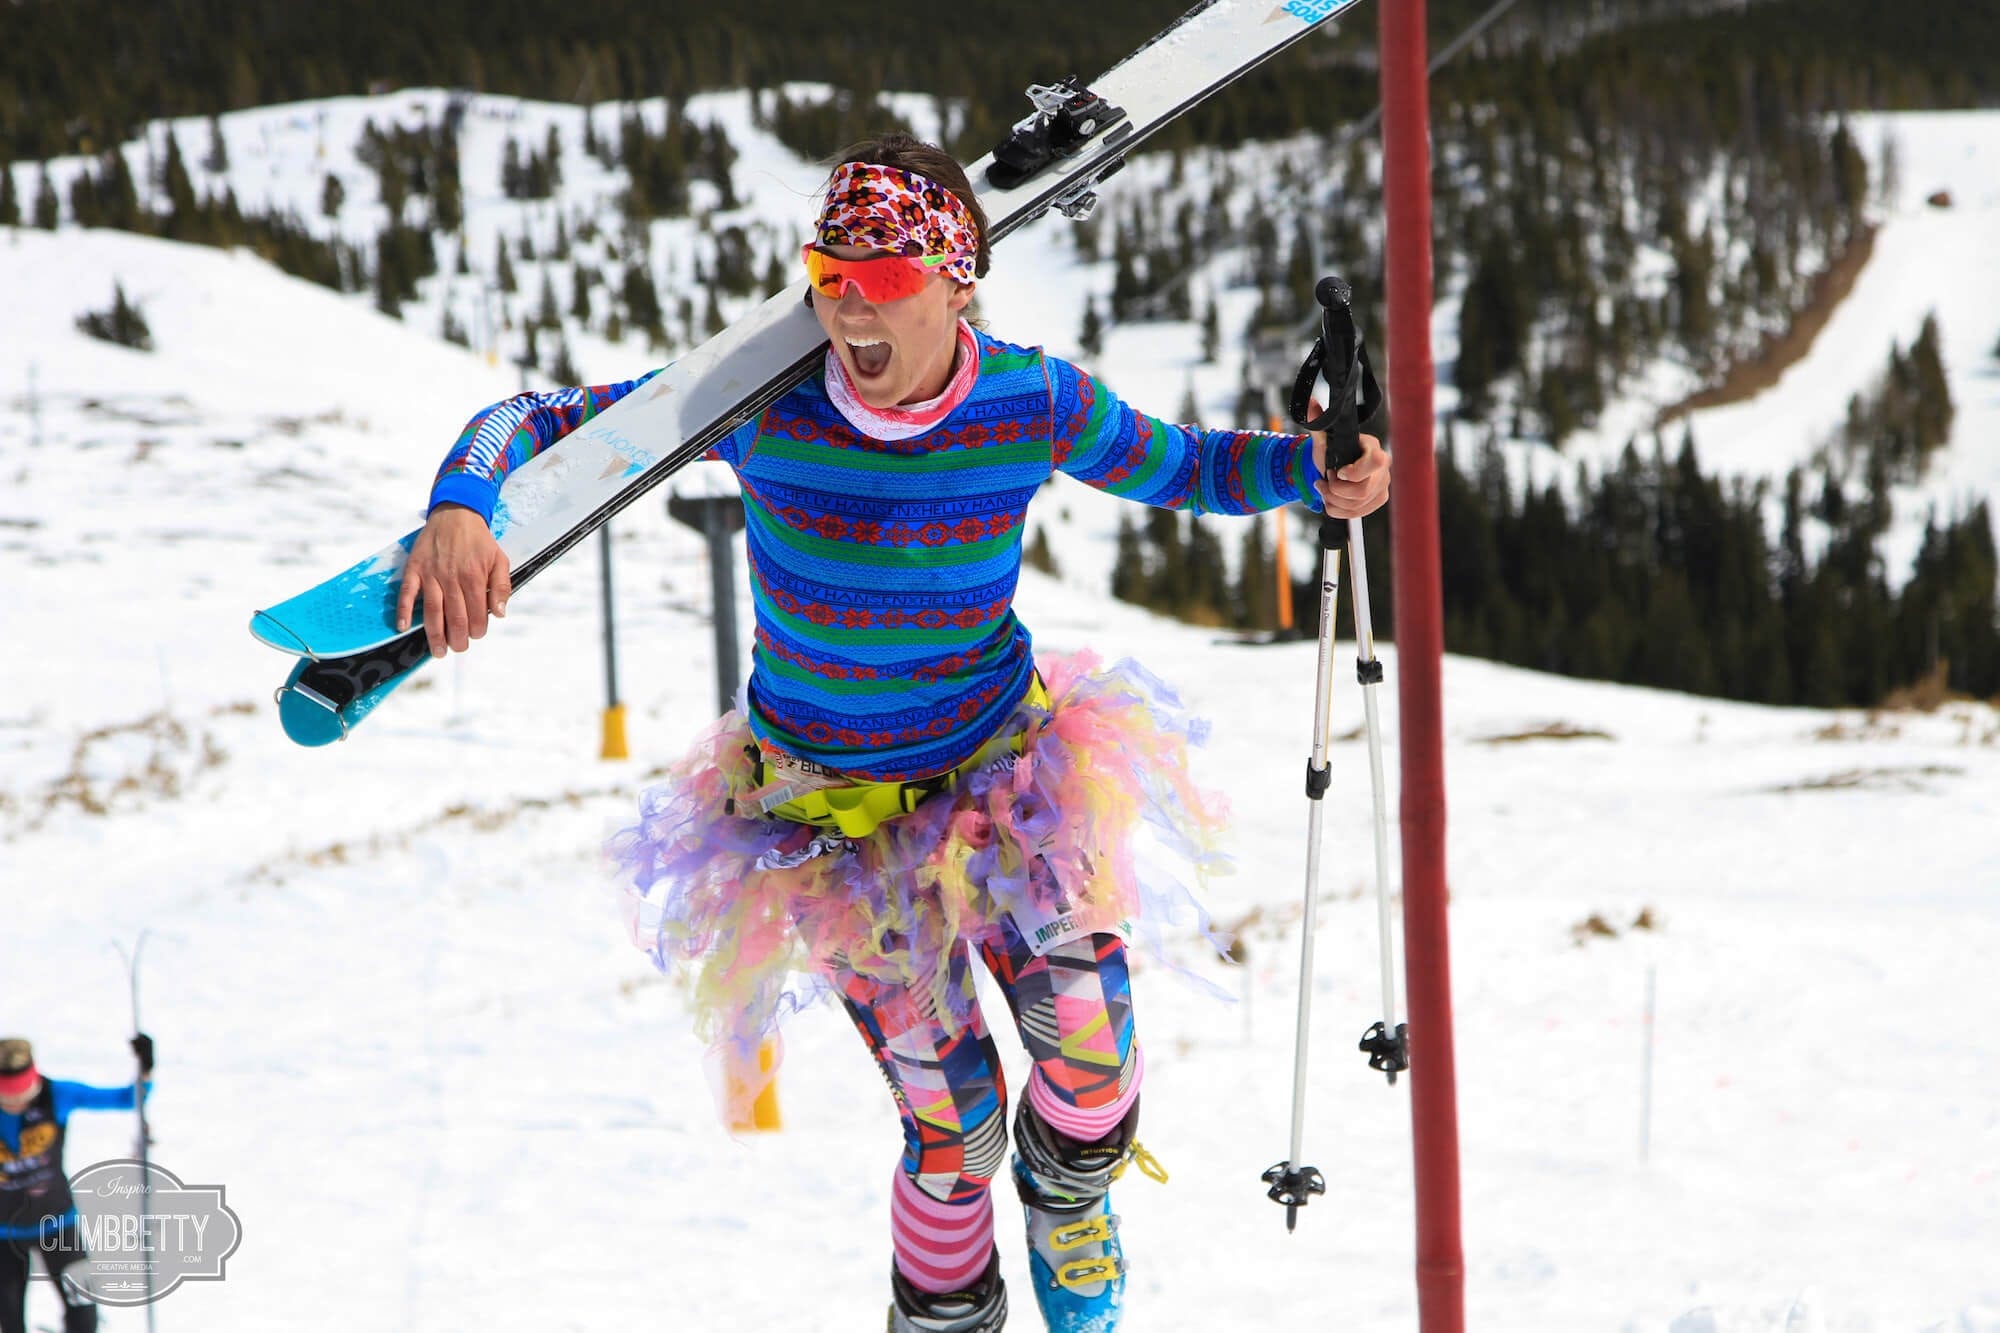 Costumed skier participating in the Imperial Challenge in Breckenridge